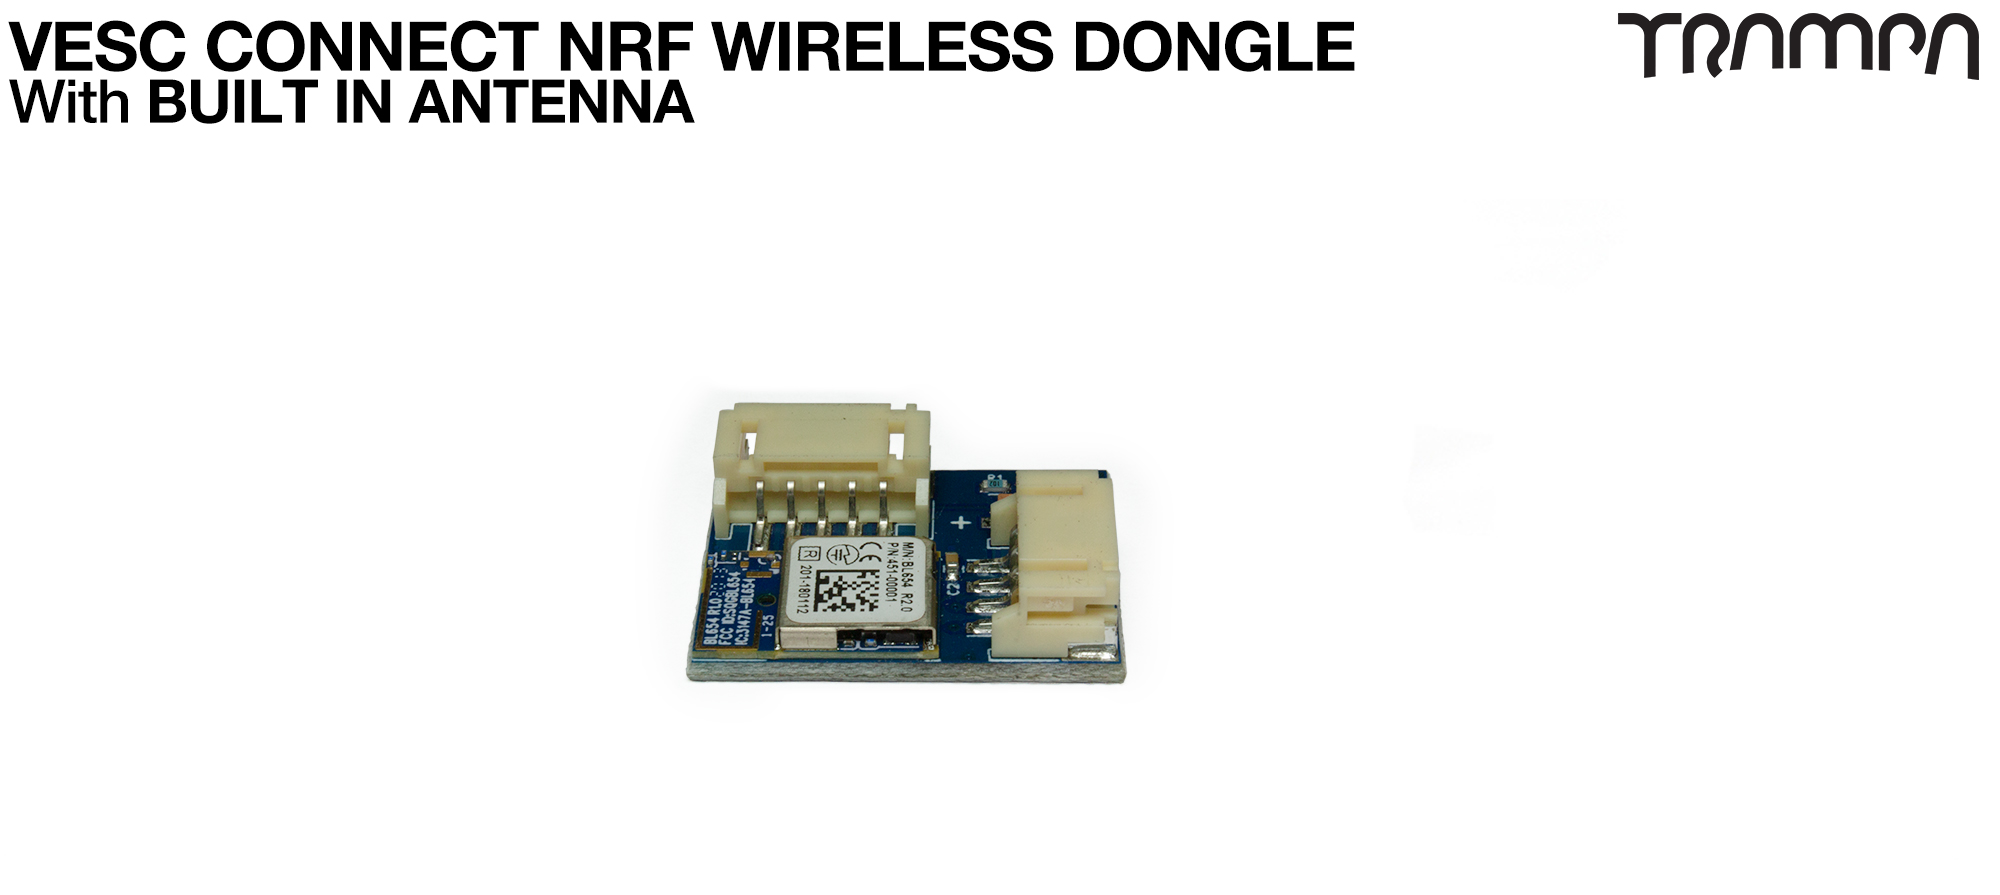 2x NRF Dongle with INTEGRATED Antenna (+£55) - OUT OF STOCK